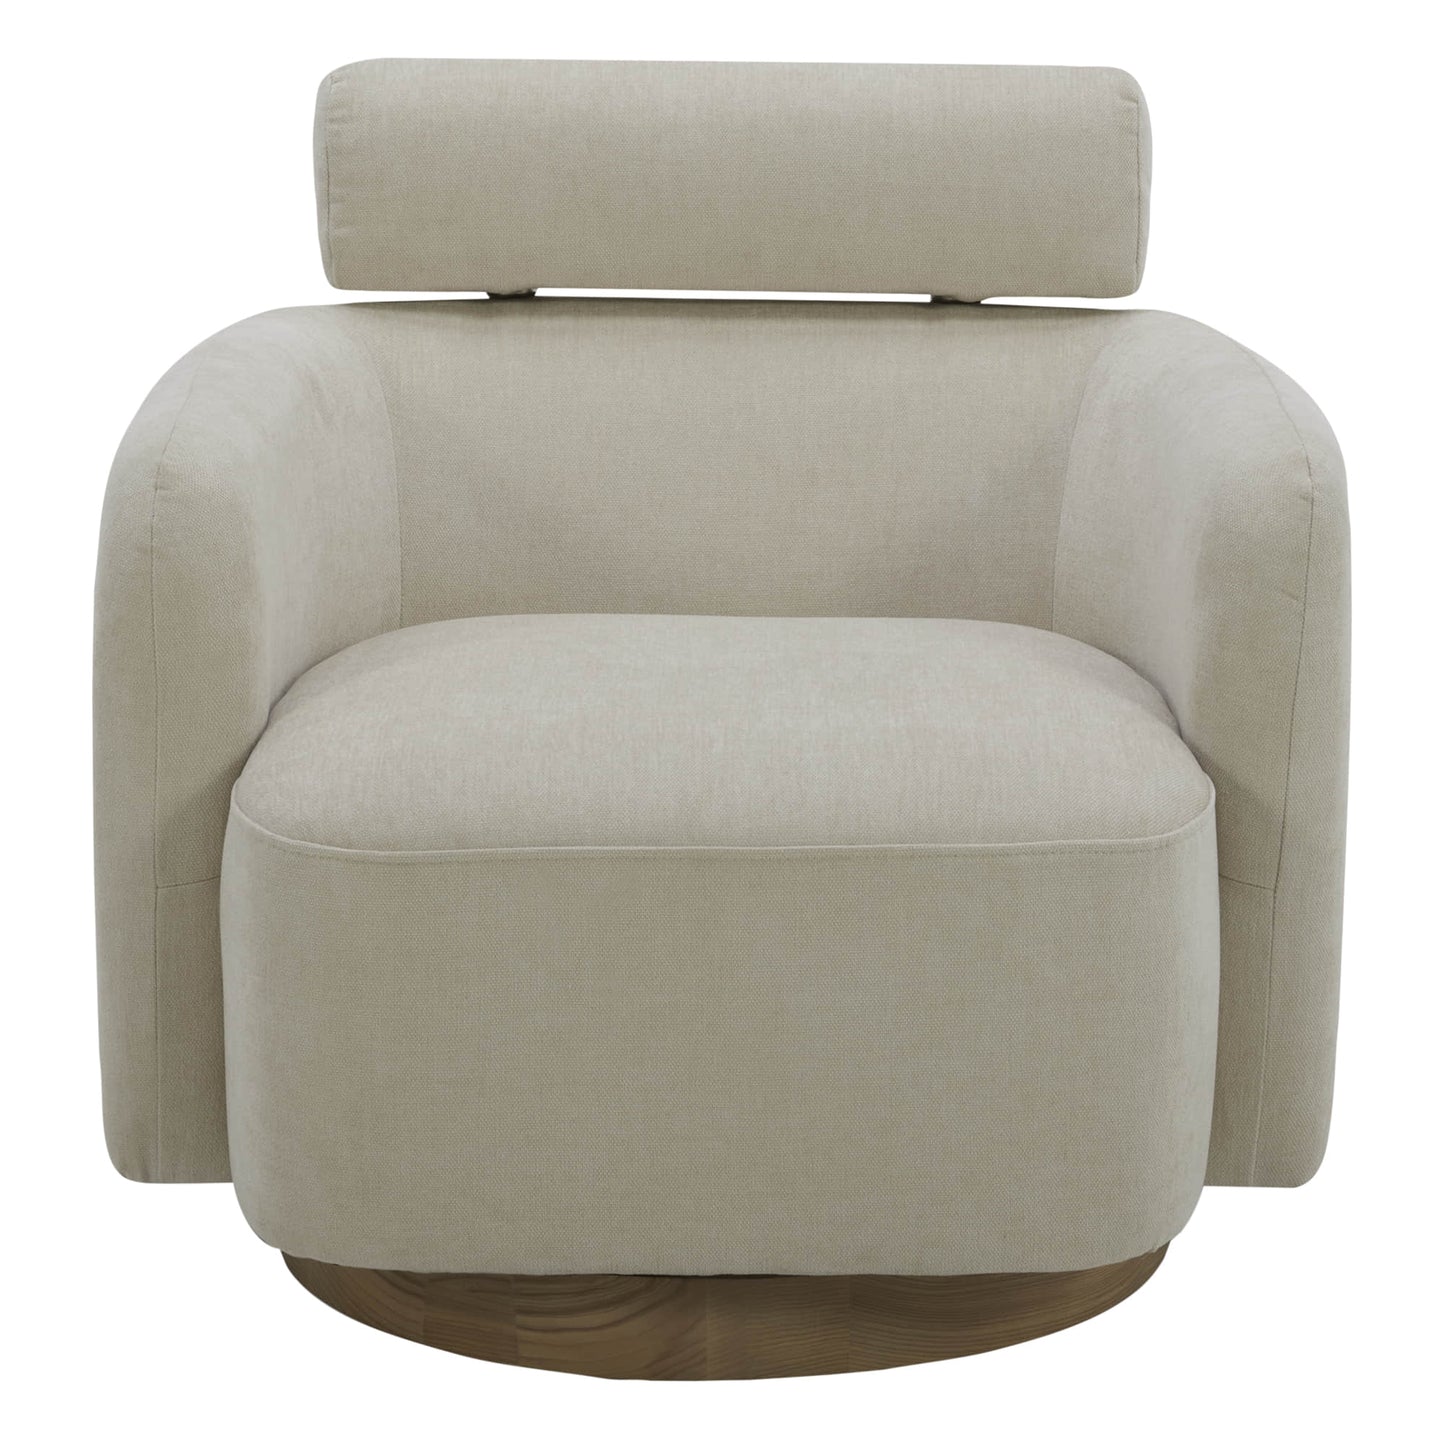 CHITA LIVING-Luna Swivel Accent Chair With Adjustable Backrest-Accent Chair-Fabric-Cream-